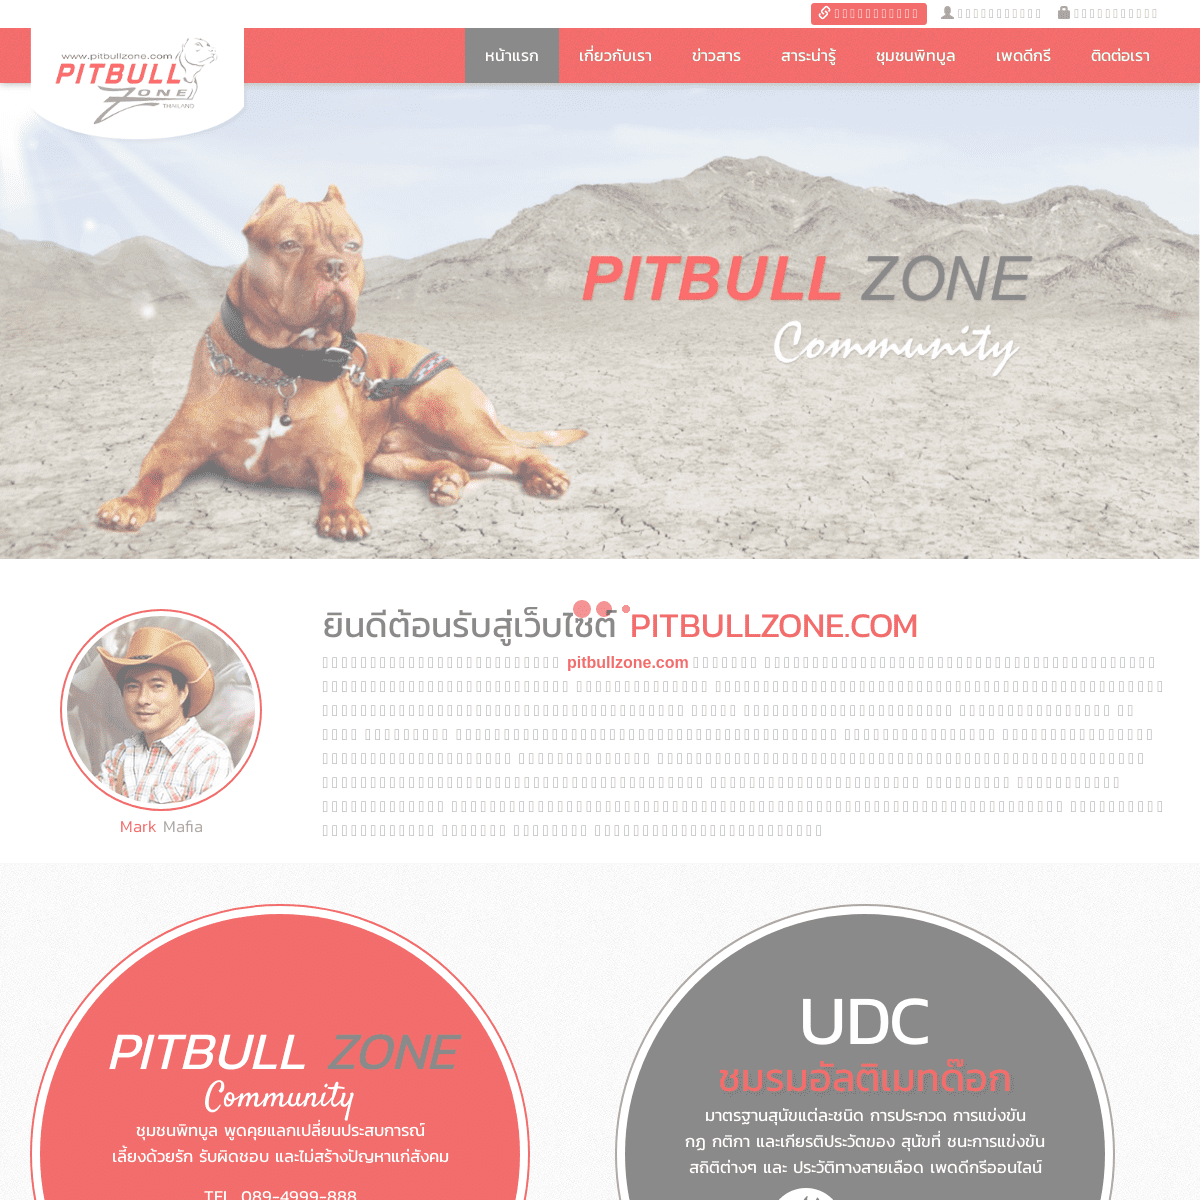 A complete backup of pitbullzone.com